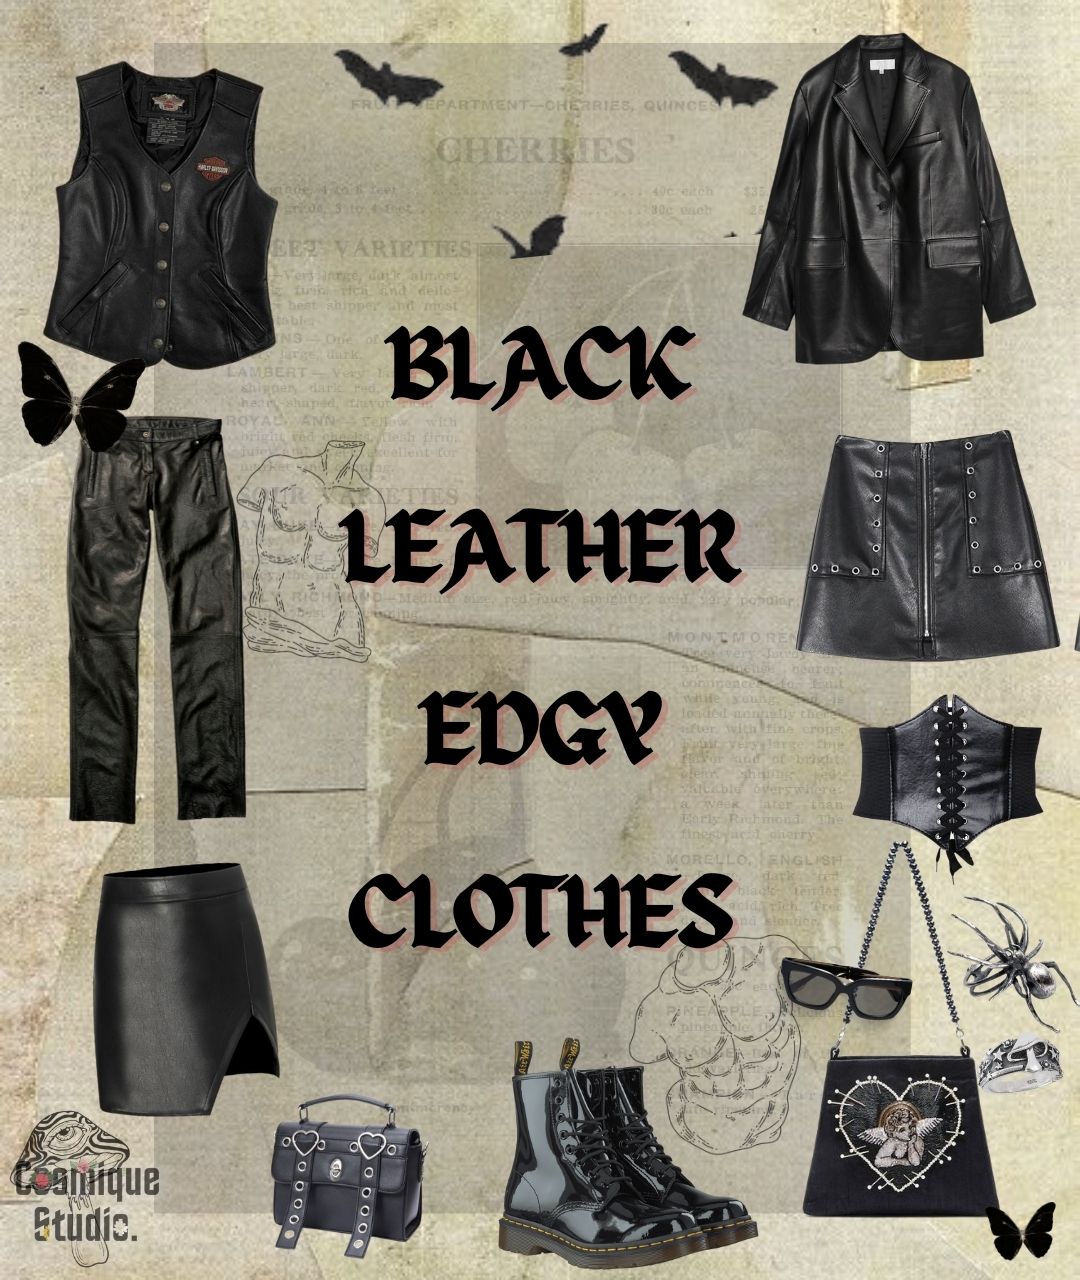 Use of leather fabric in edgy style, leather jacket, leather skirt, leather boots, leather bag, leather pants collage